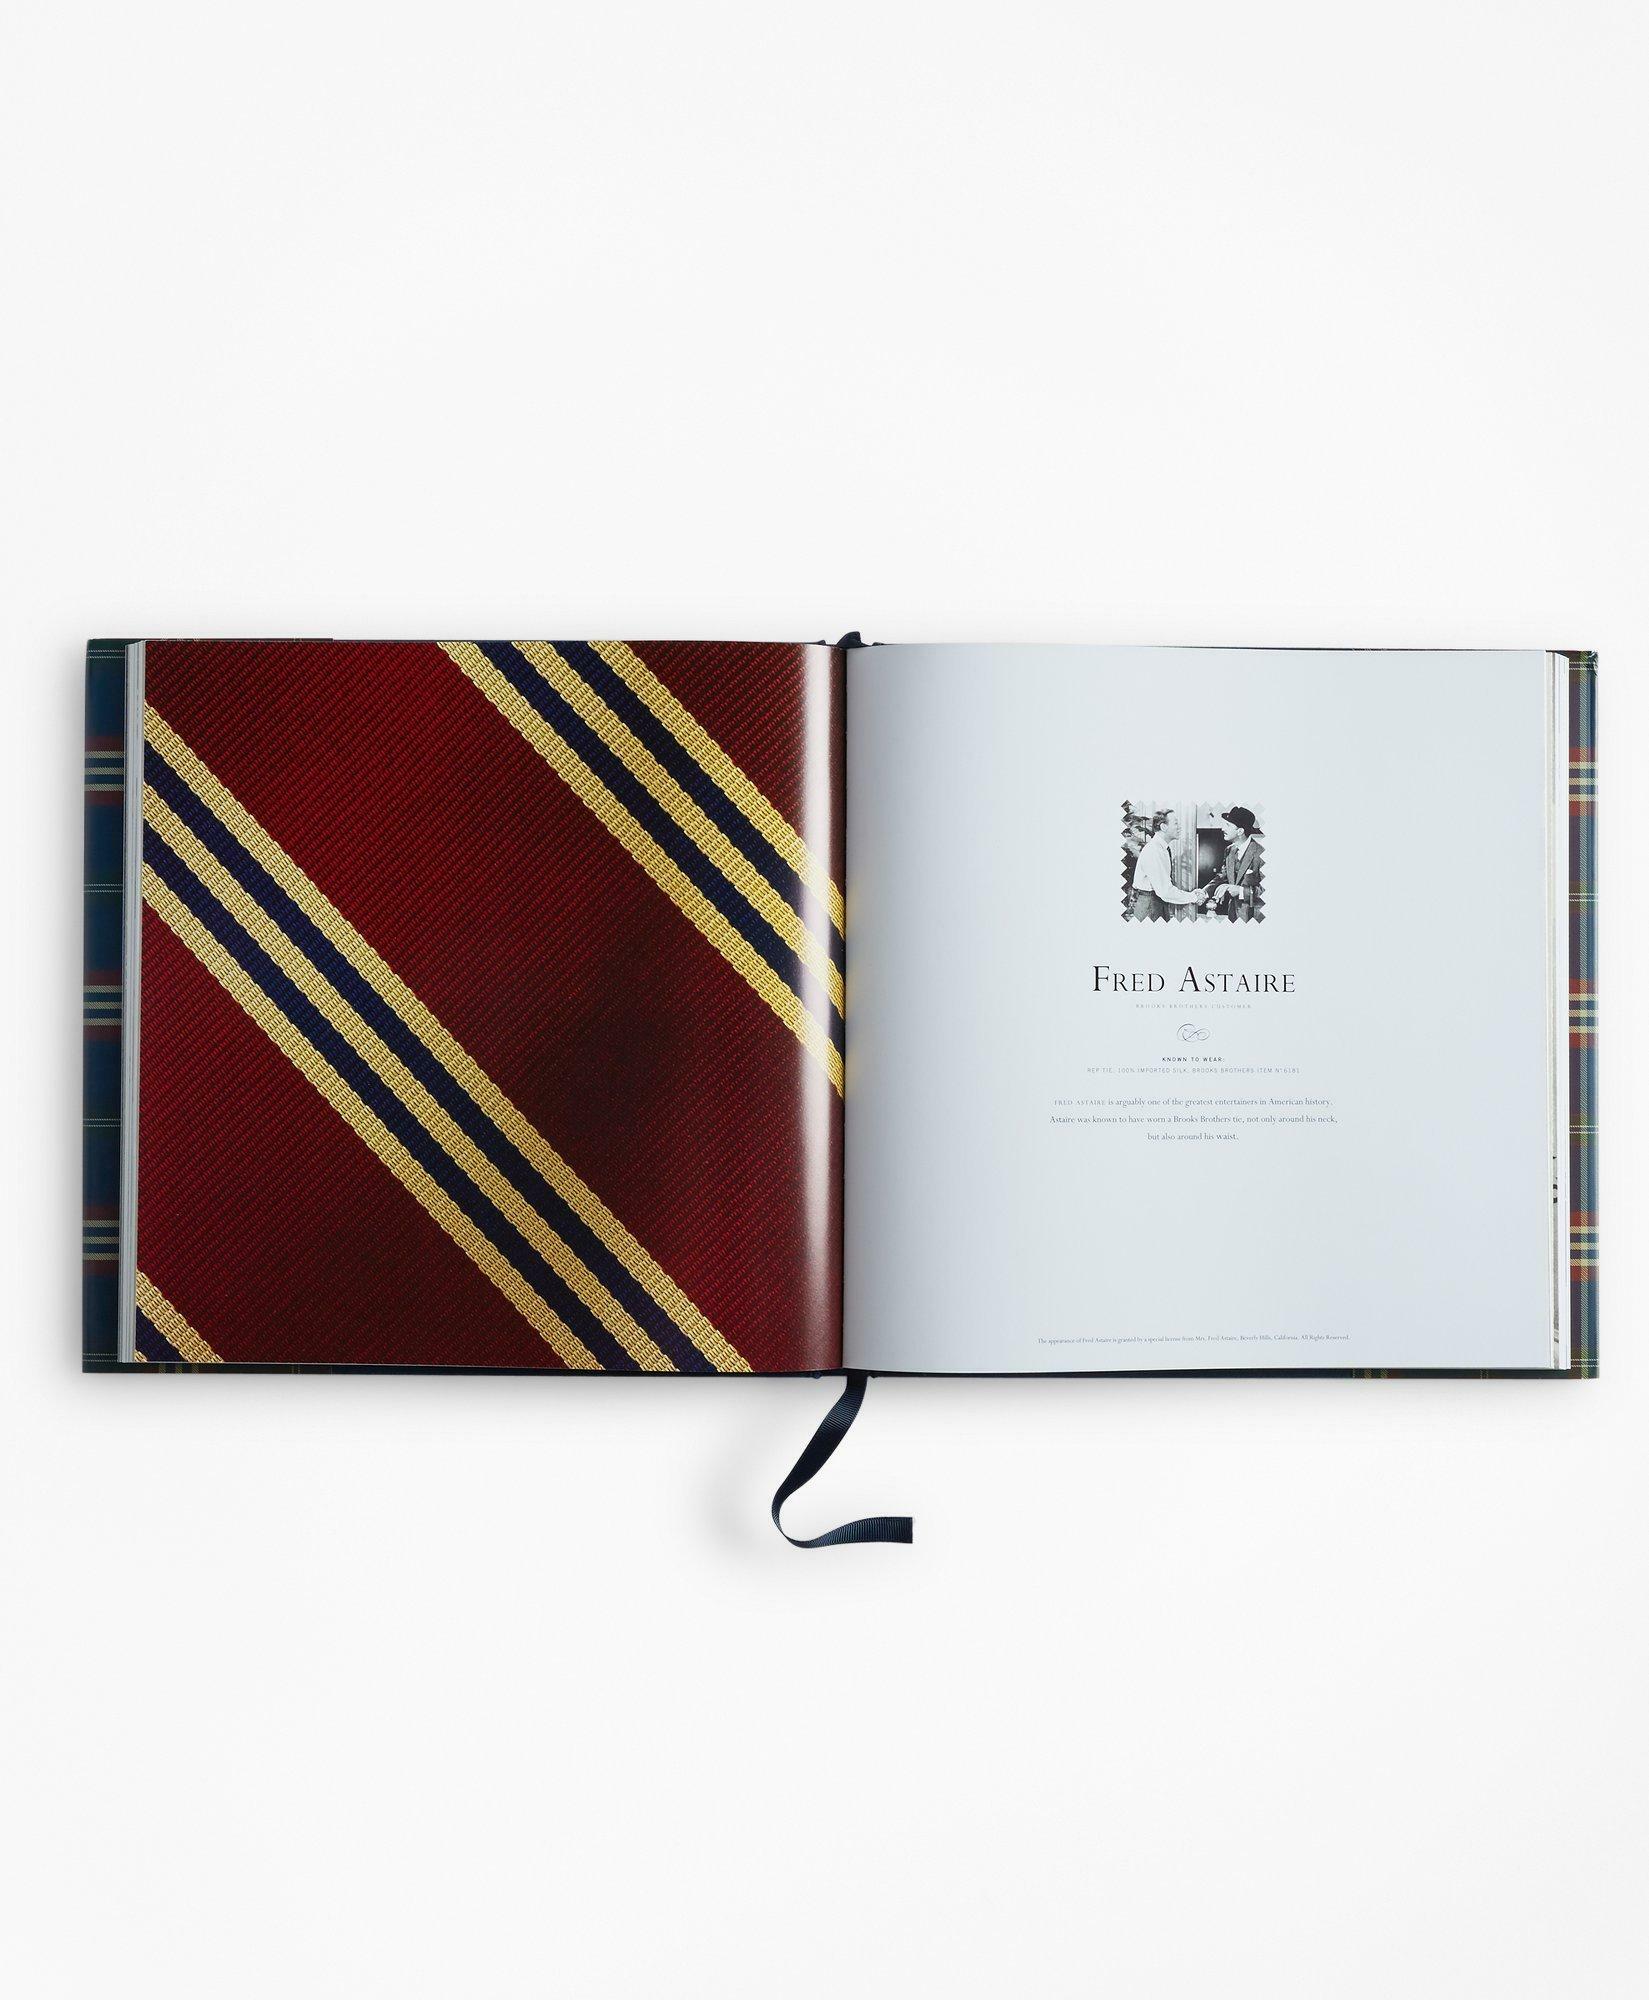 Brooks Brothers Men's Generations of Style Book, Second Edition